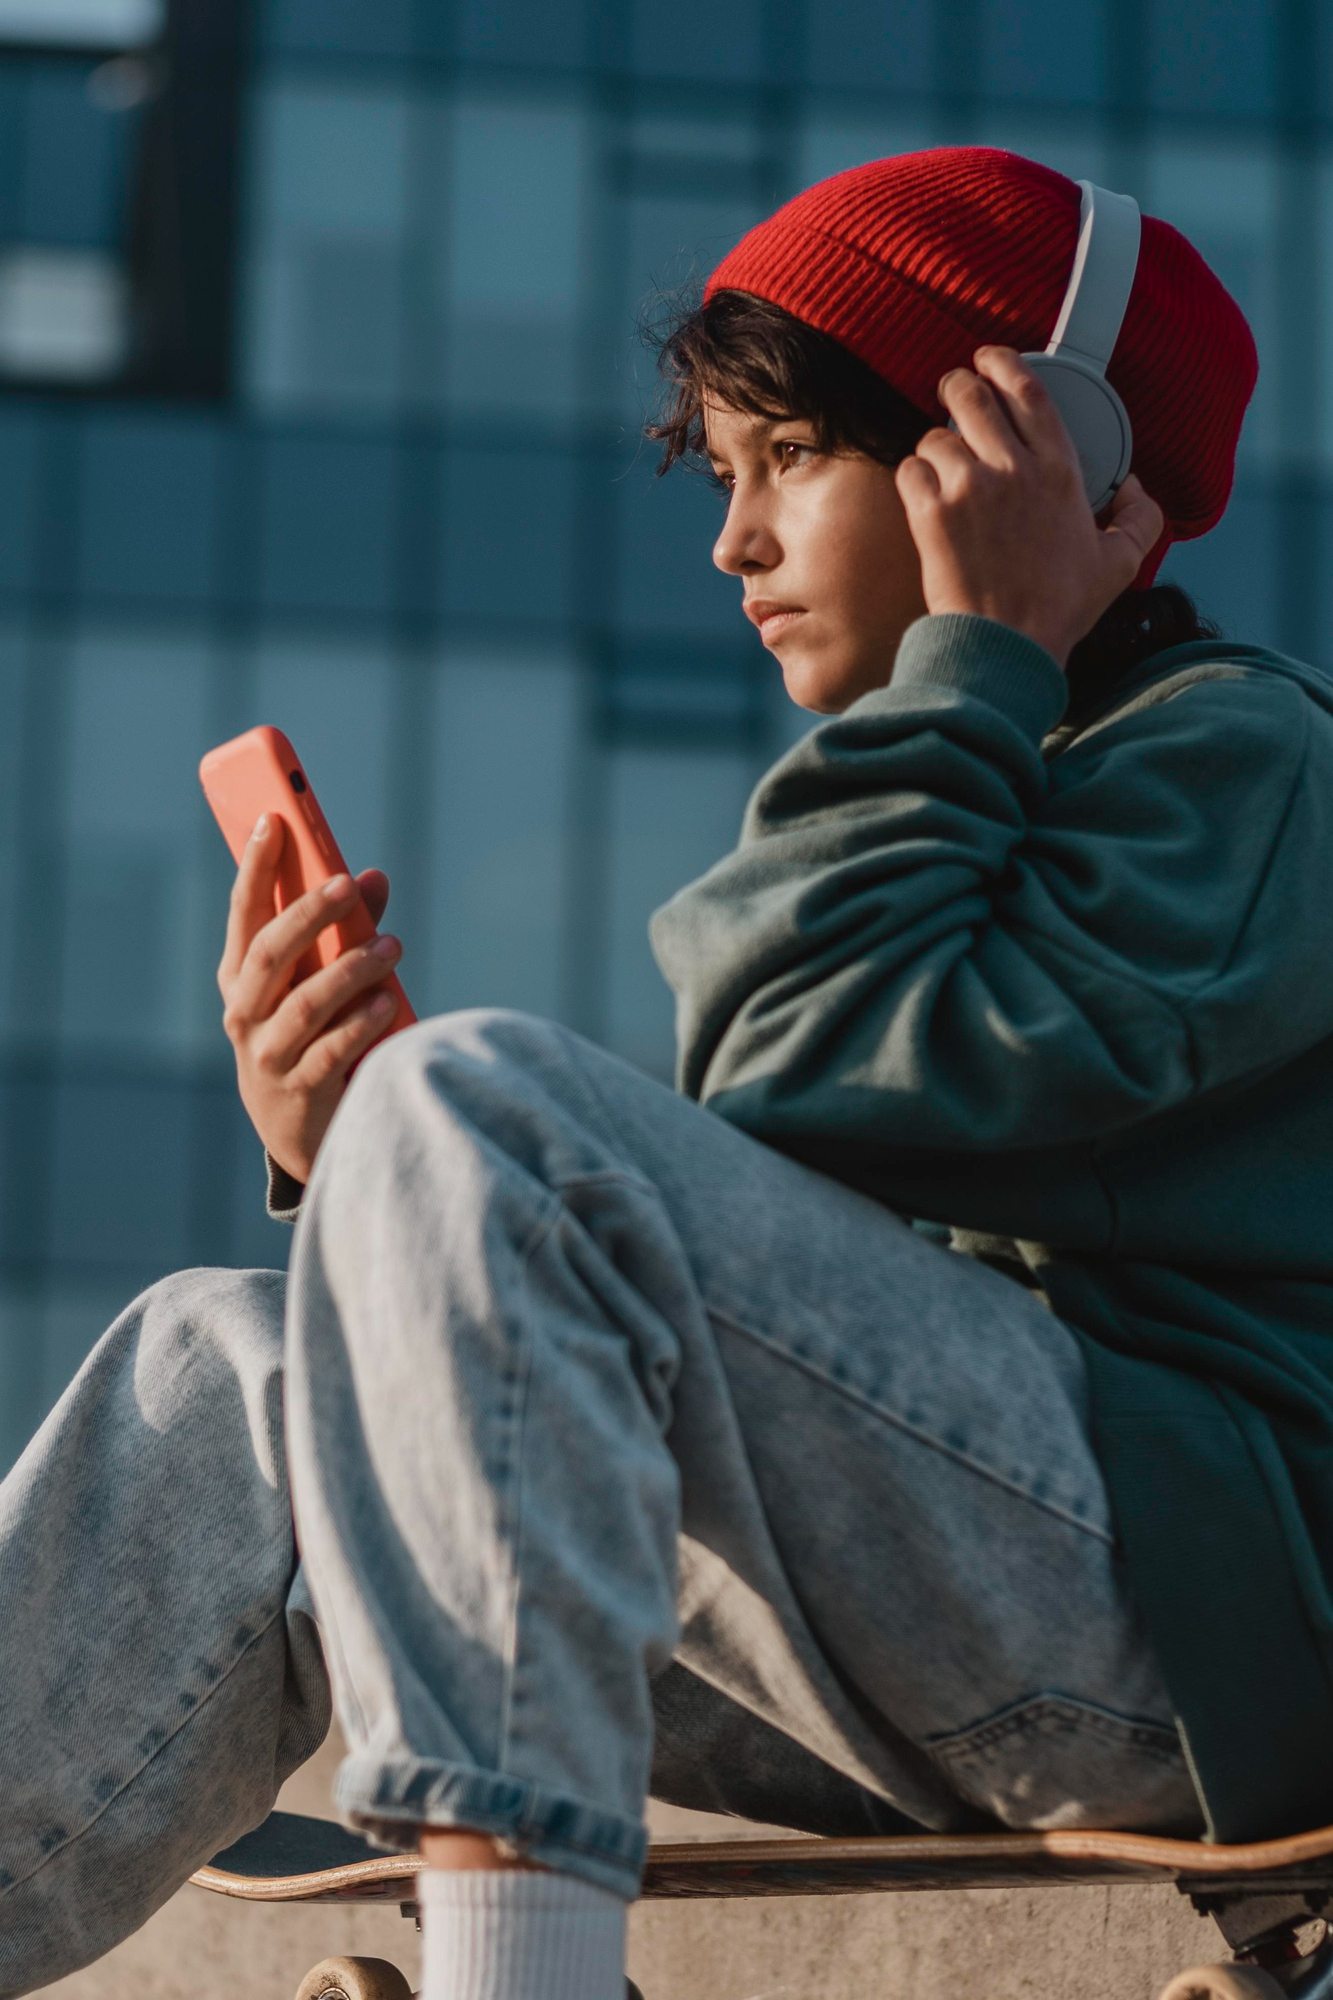 A young boy listening to something on his headsets while holding a phone | Source: Freepik